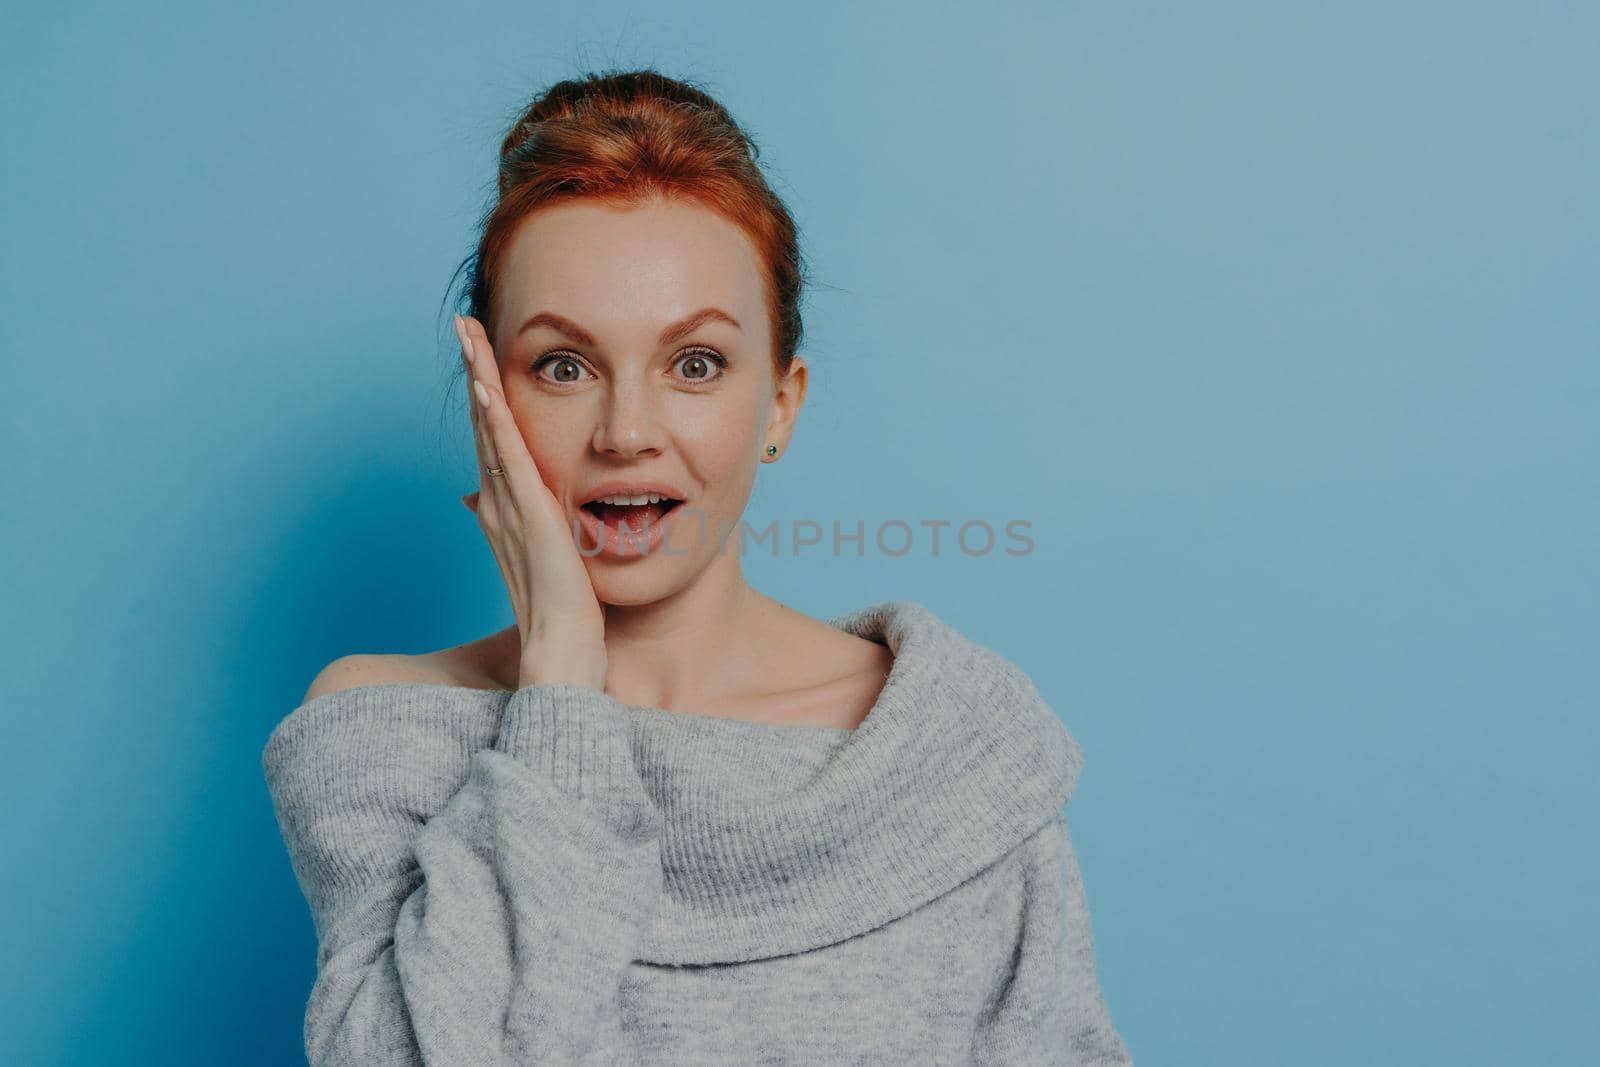 Portrait of surprised amazed red haired woman looking at camera with impressed face expression, feeling happy after hearing unexpected news, isolated on blue studio background, female being shocked